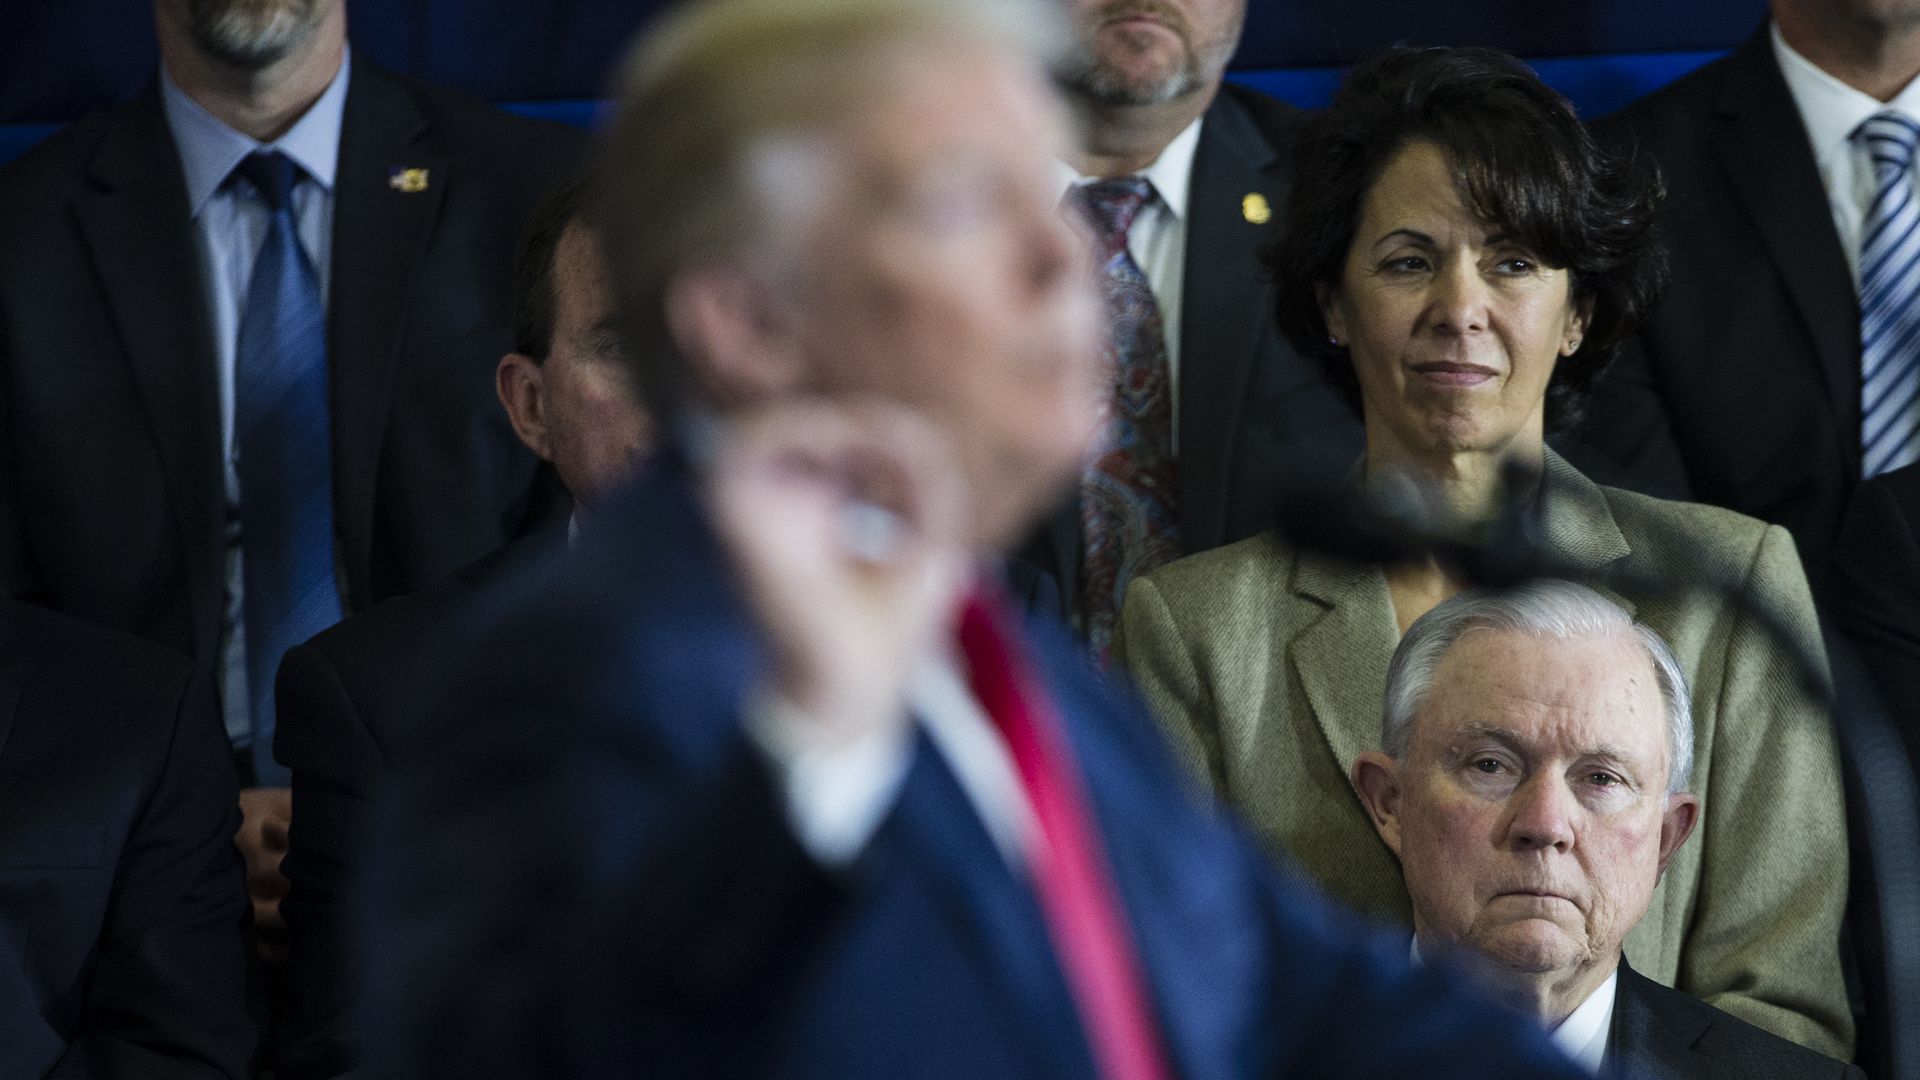 President Trump in the foreground and former Attorney General Jeff Sessions in the background